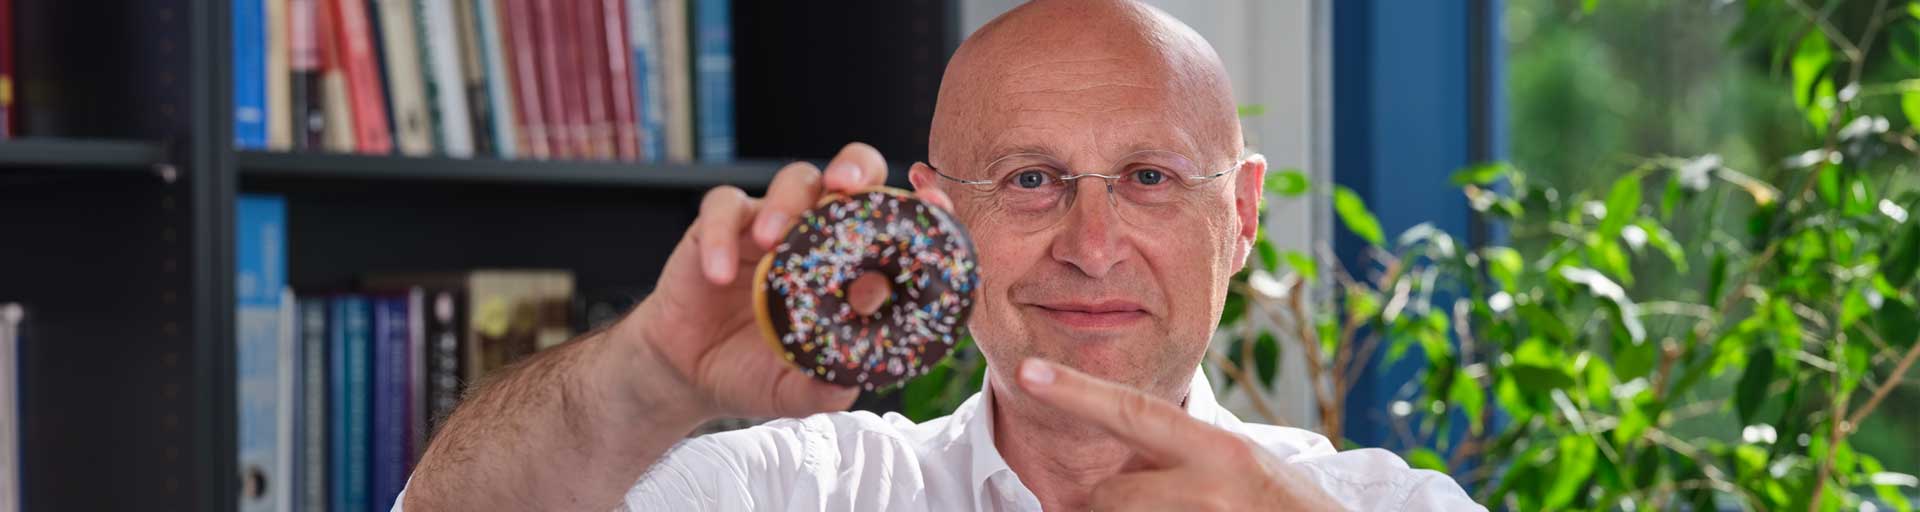 Nobel laureate Stefan W. Hell shows a donut, the symbol for his groundbreaking idea of a donut-shaped laser beam.